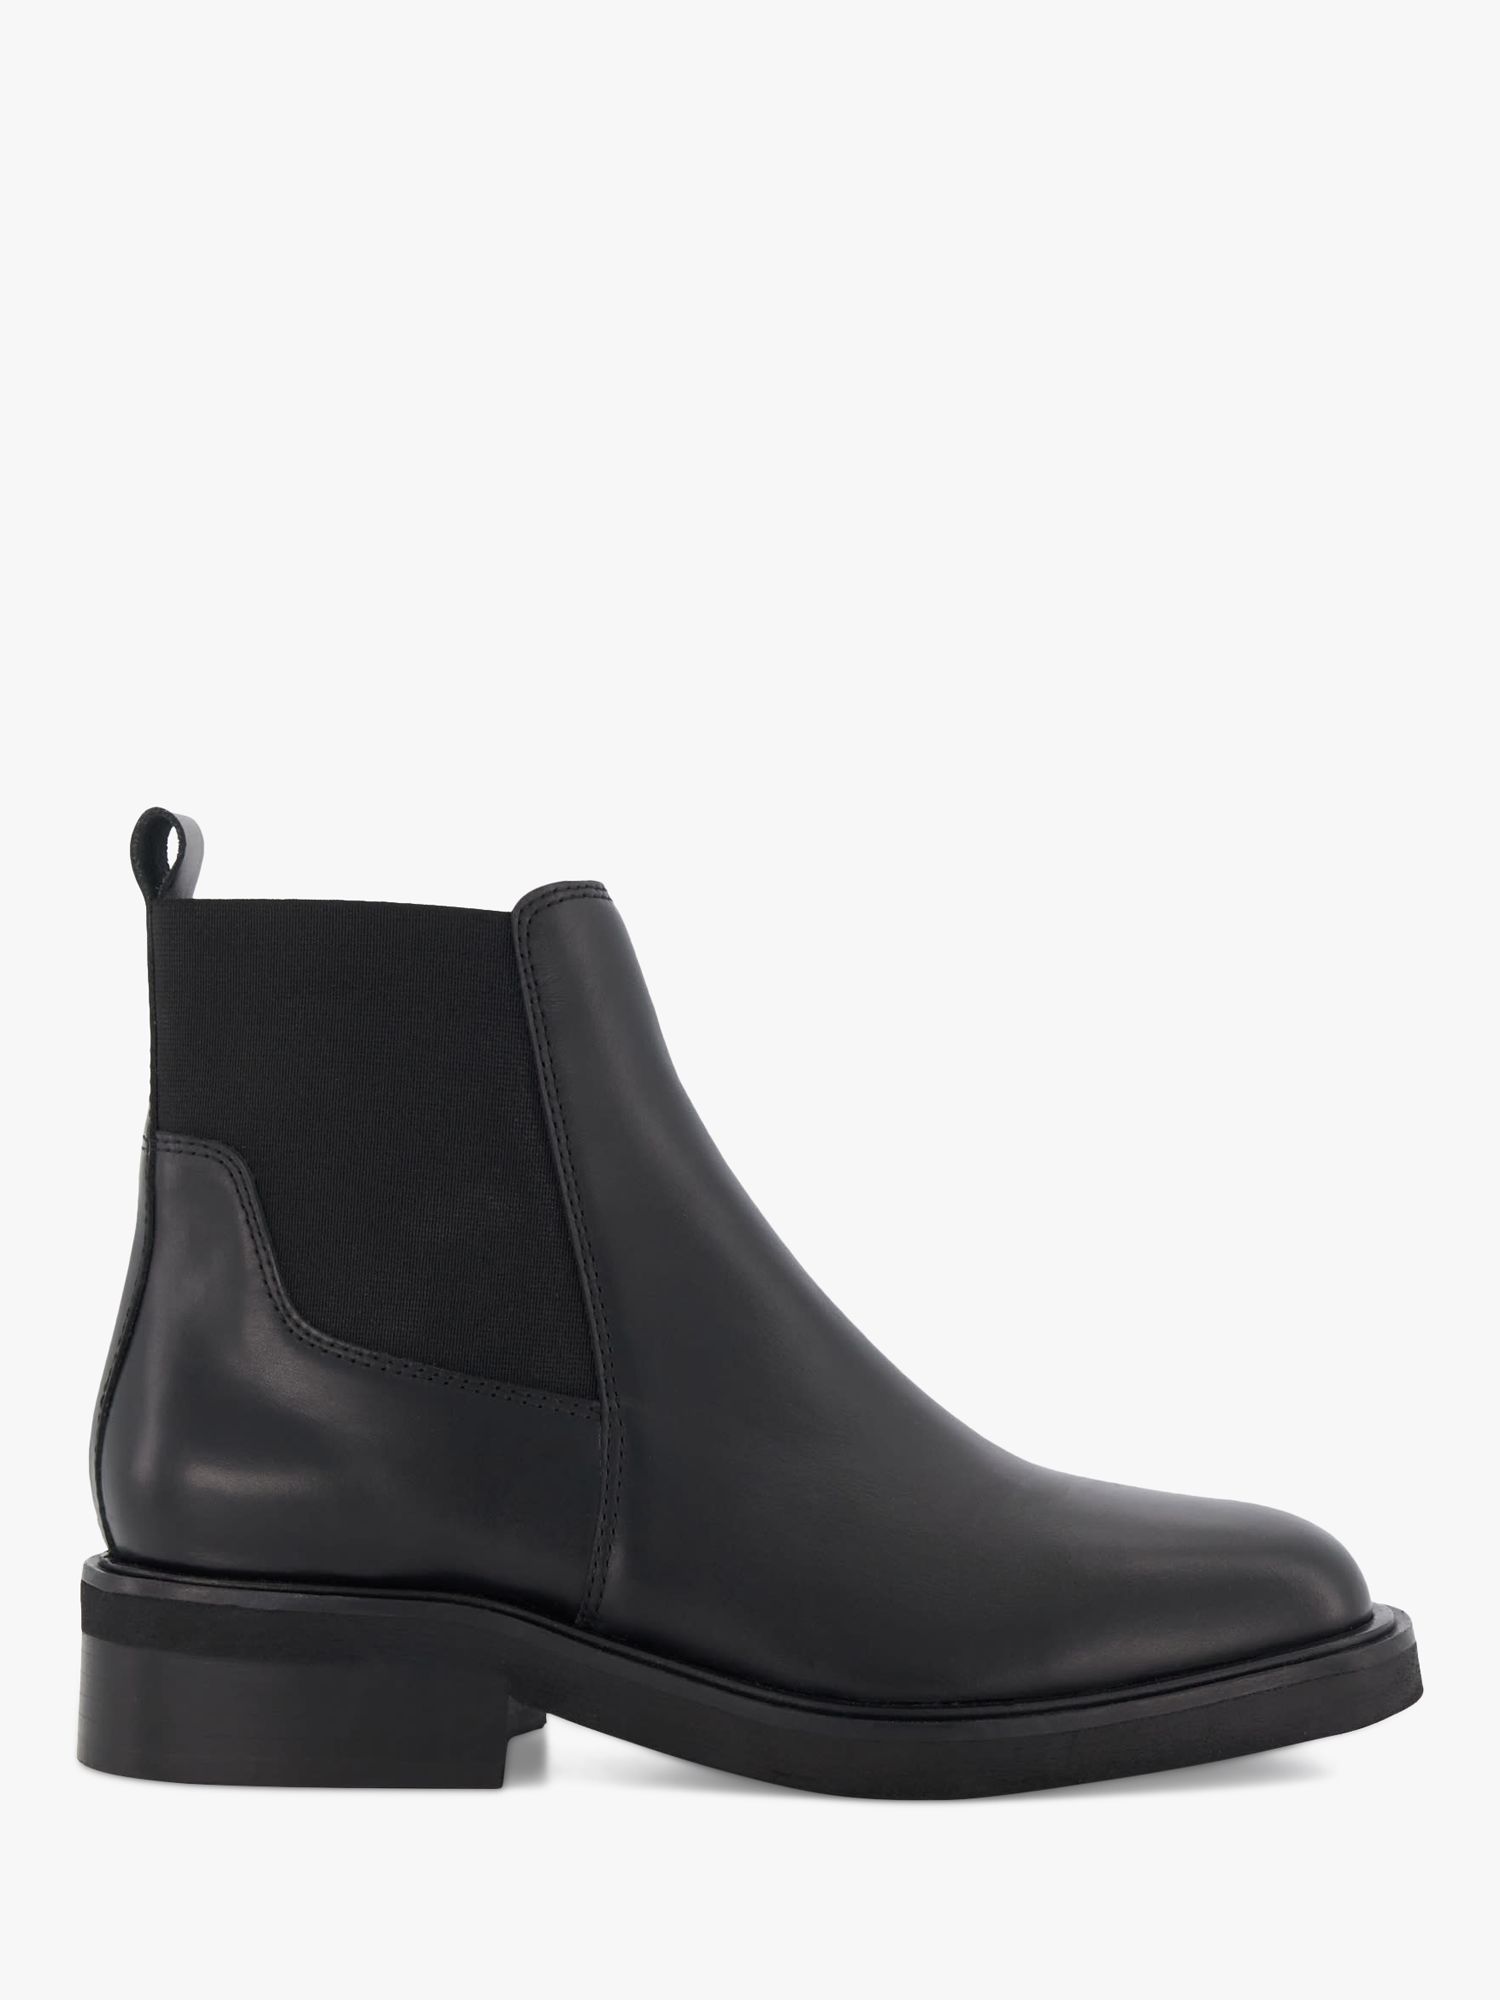 Dune Penney Leather Chelsea Boots, Black at John Lewis & Partners